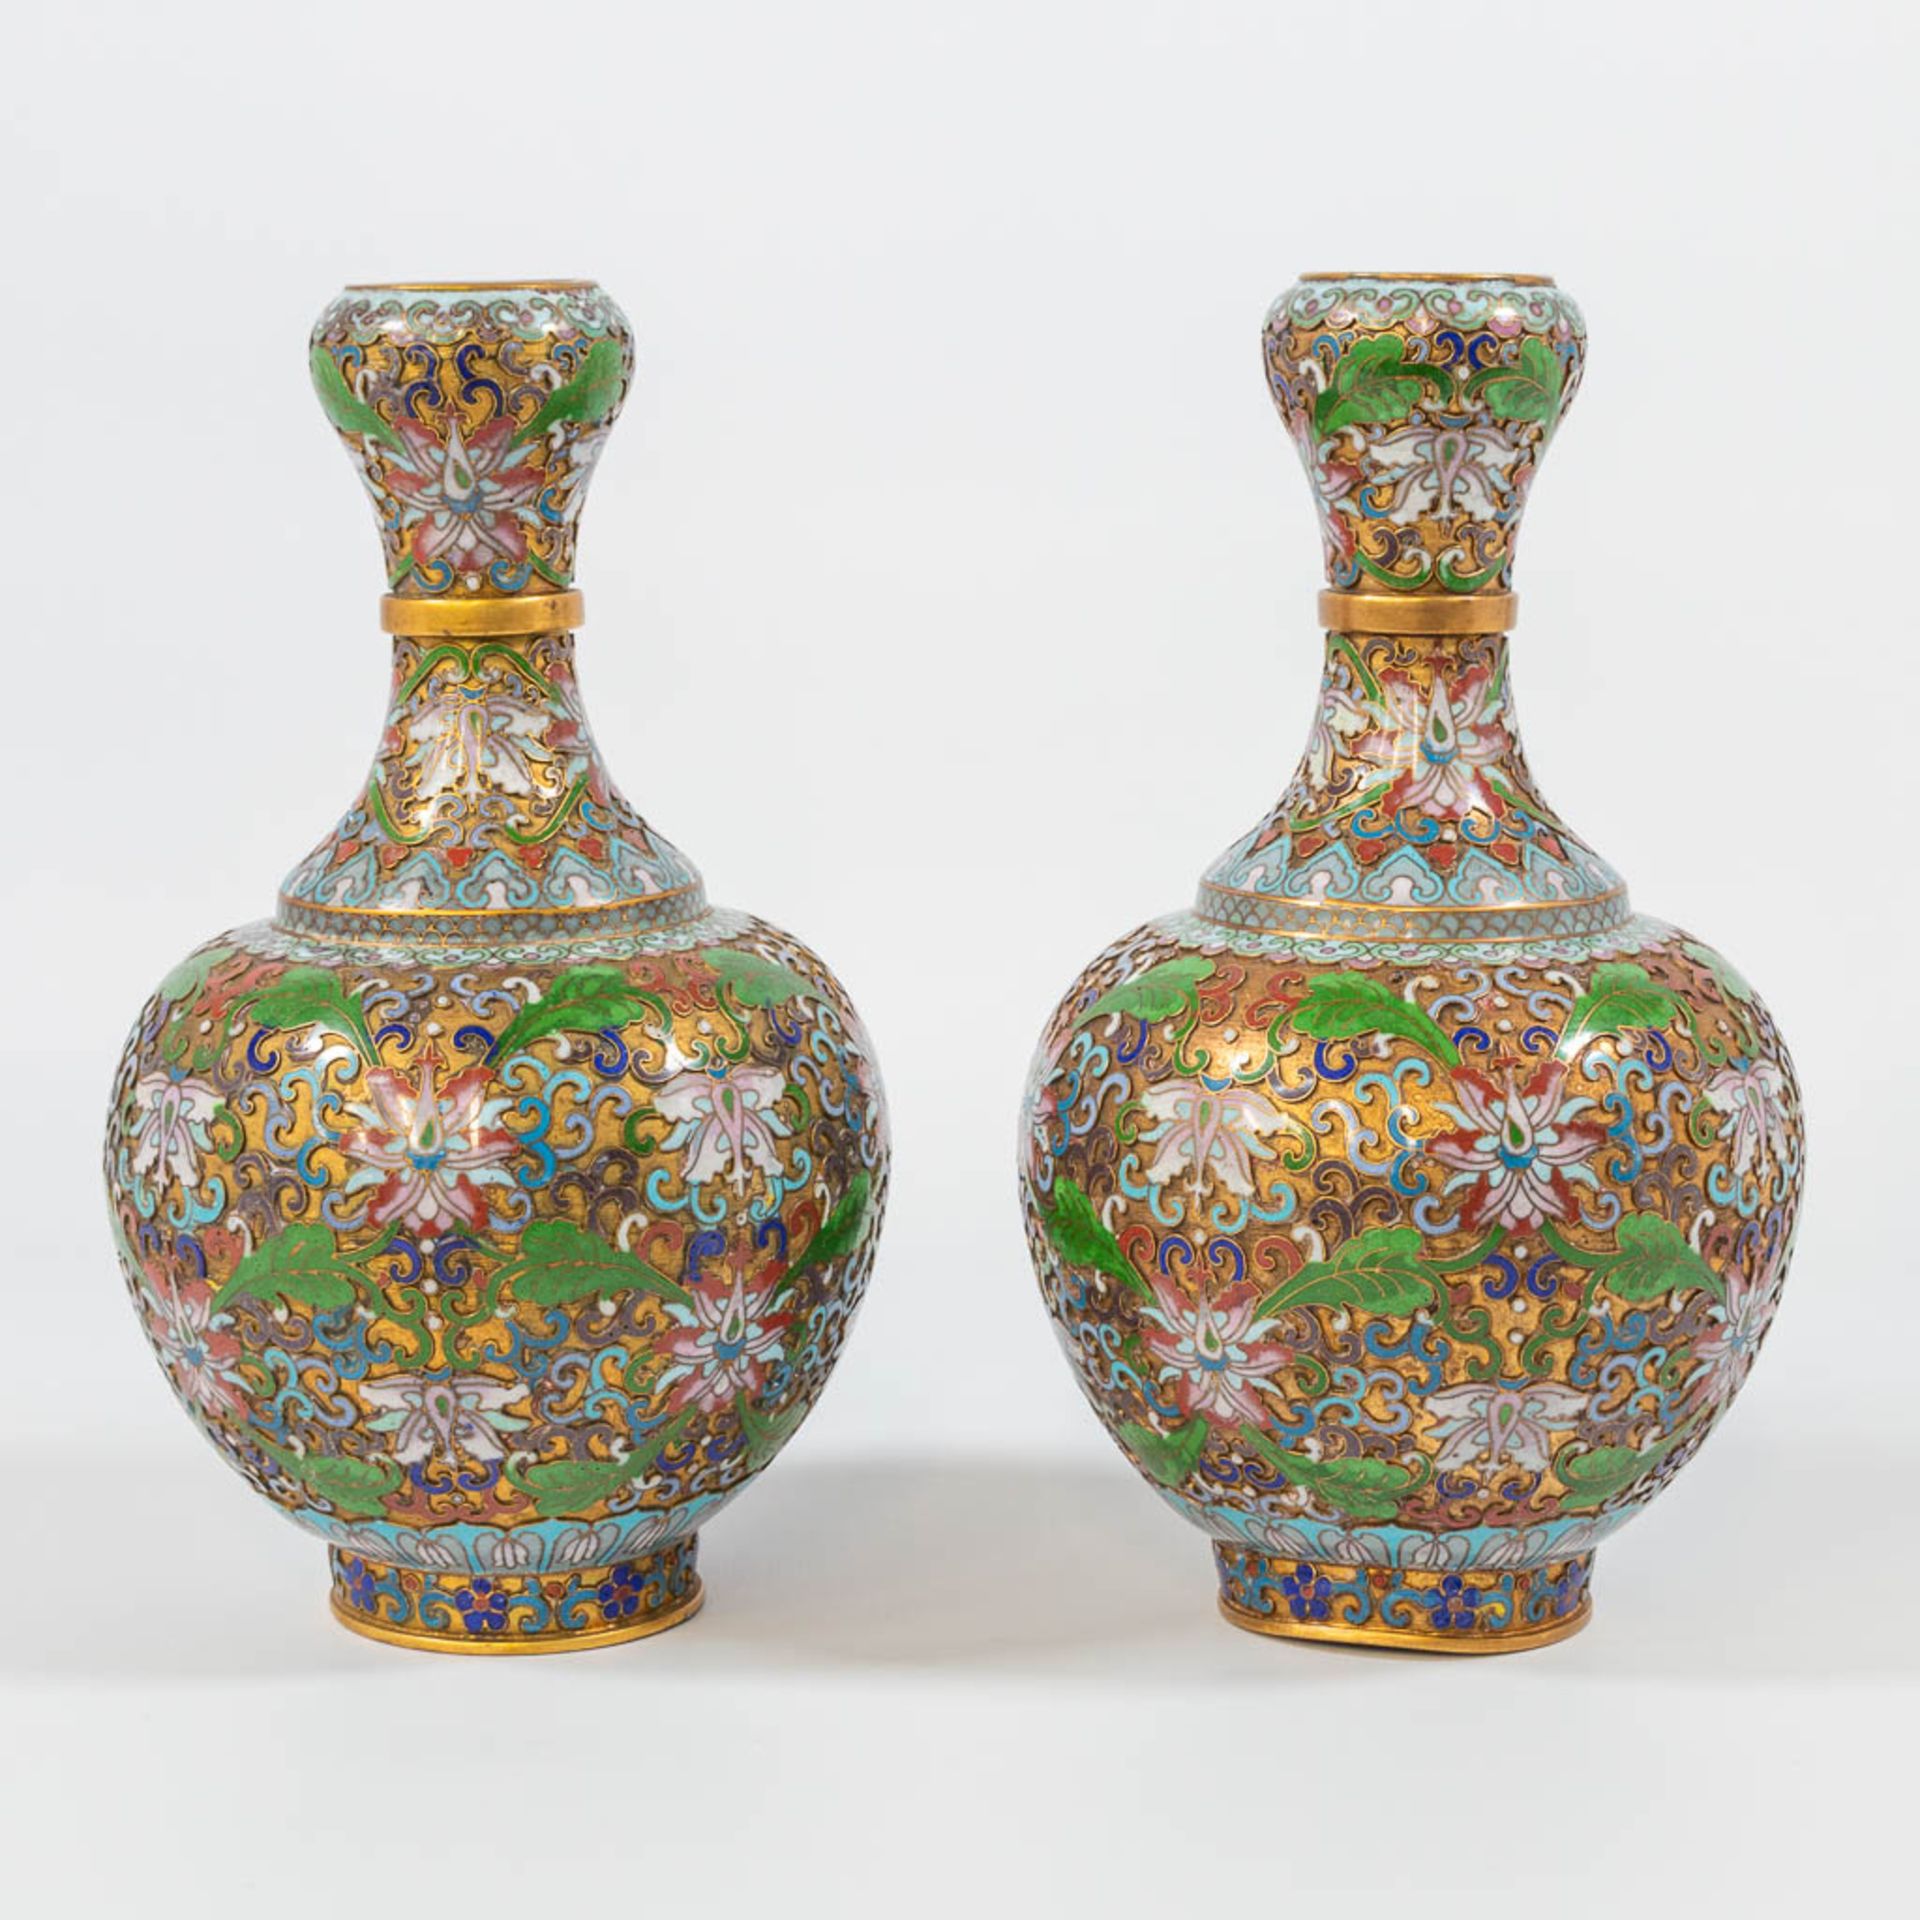 A pair of openworked Cloisonné vases, made of Bronze and enamel.